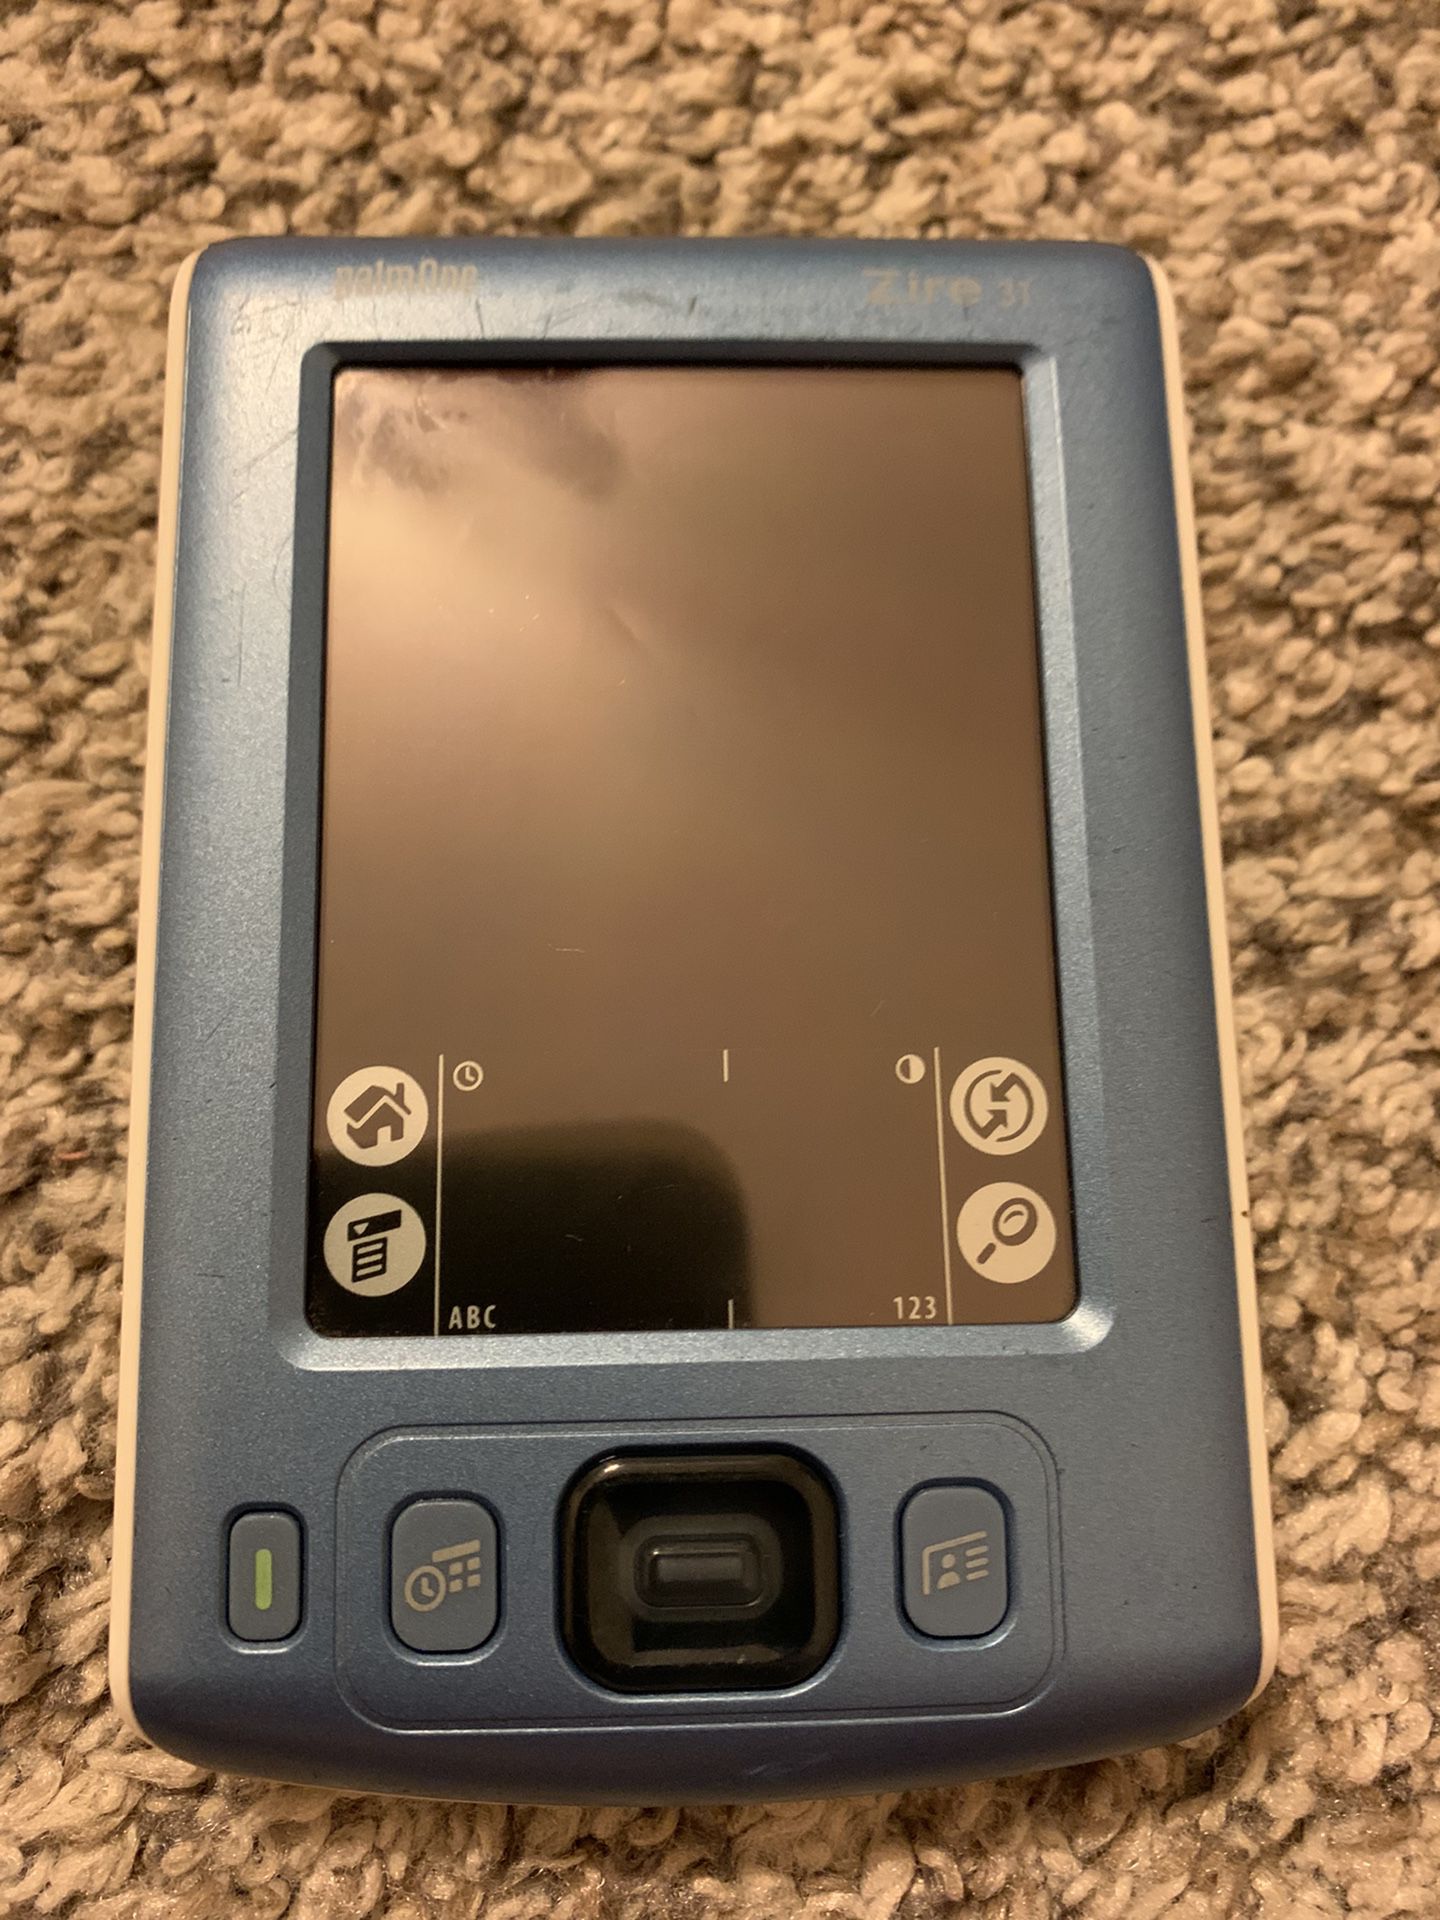 PALM PALMONE ZIRE 31 HANDHELD PDA ORGANIZER for Sale in Asheville, NC  OfferUp